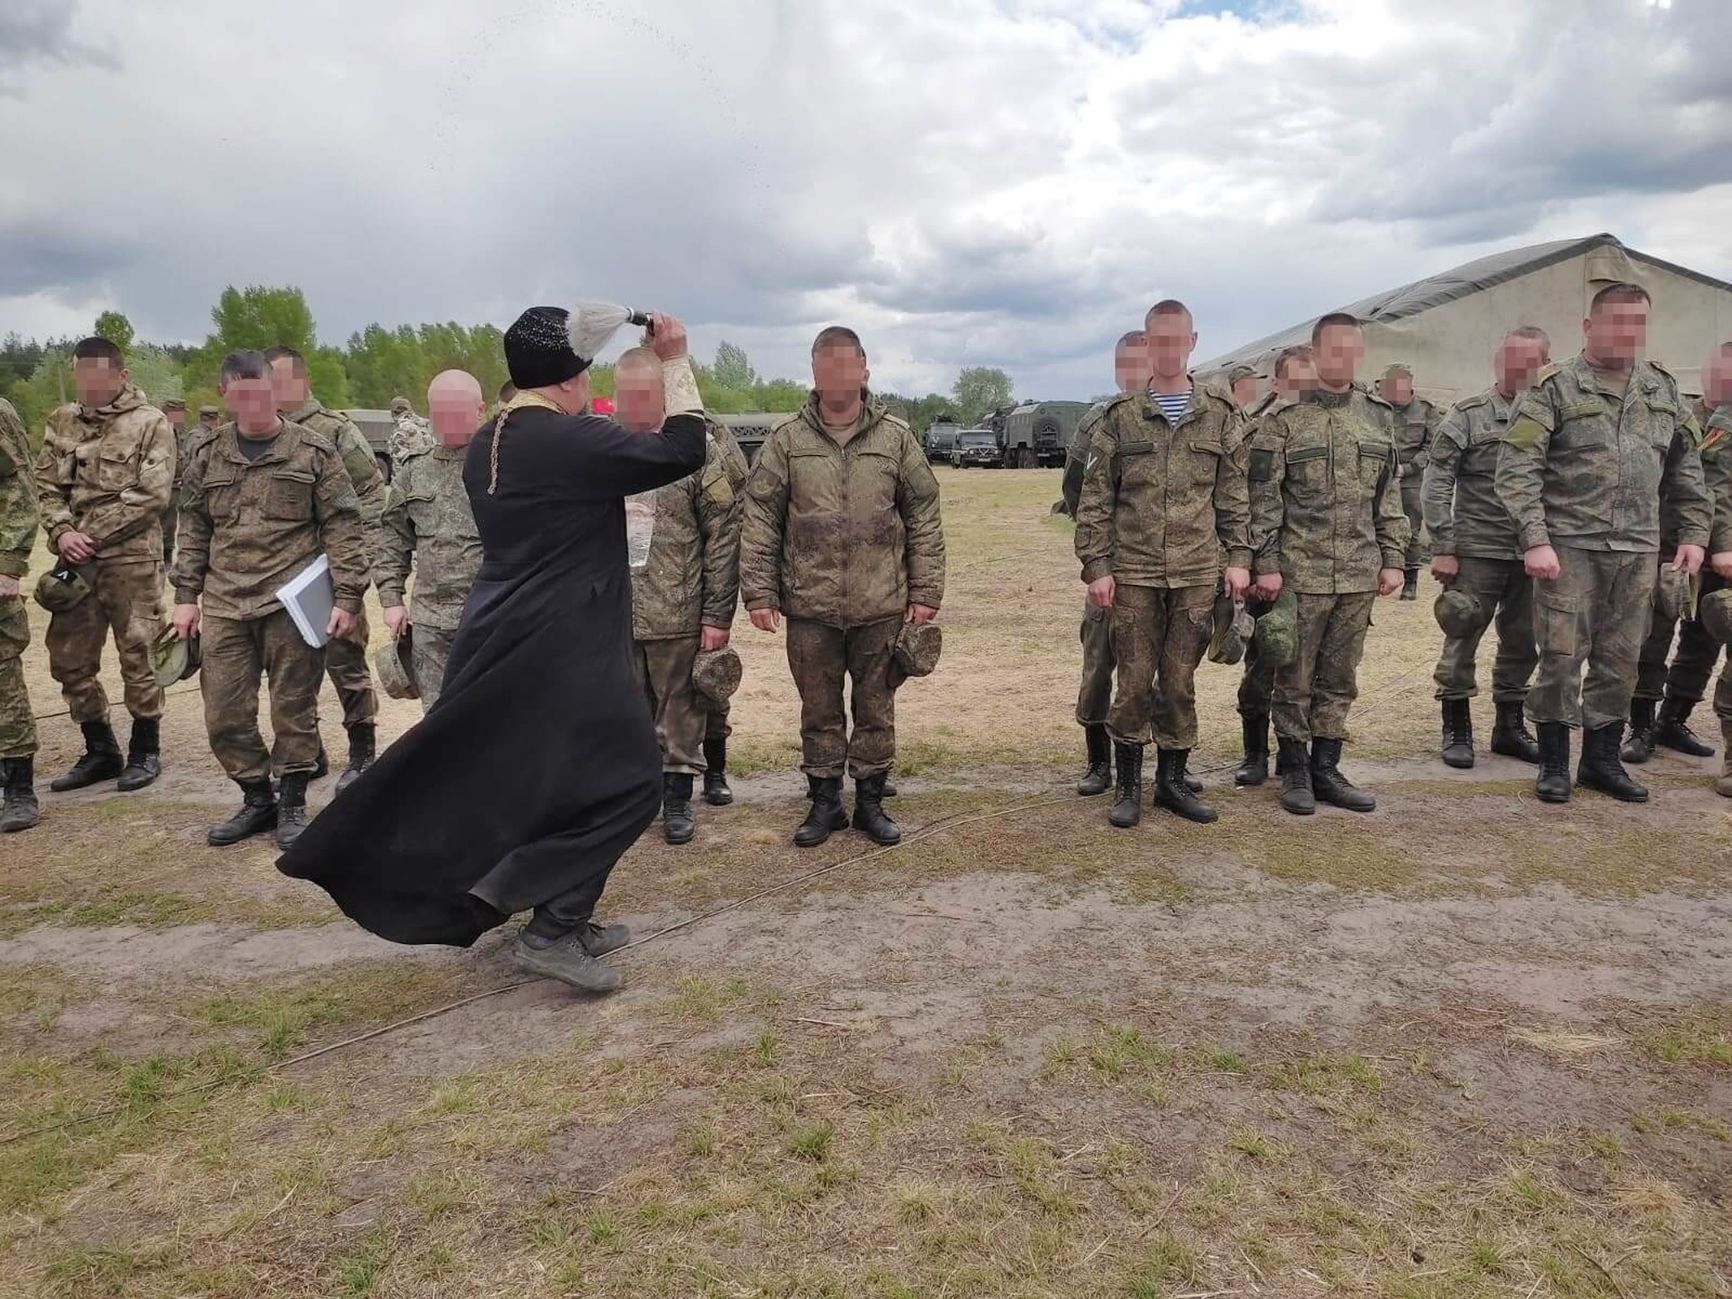 A priest administers communion to the “SMO” fighters